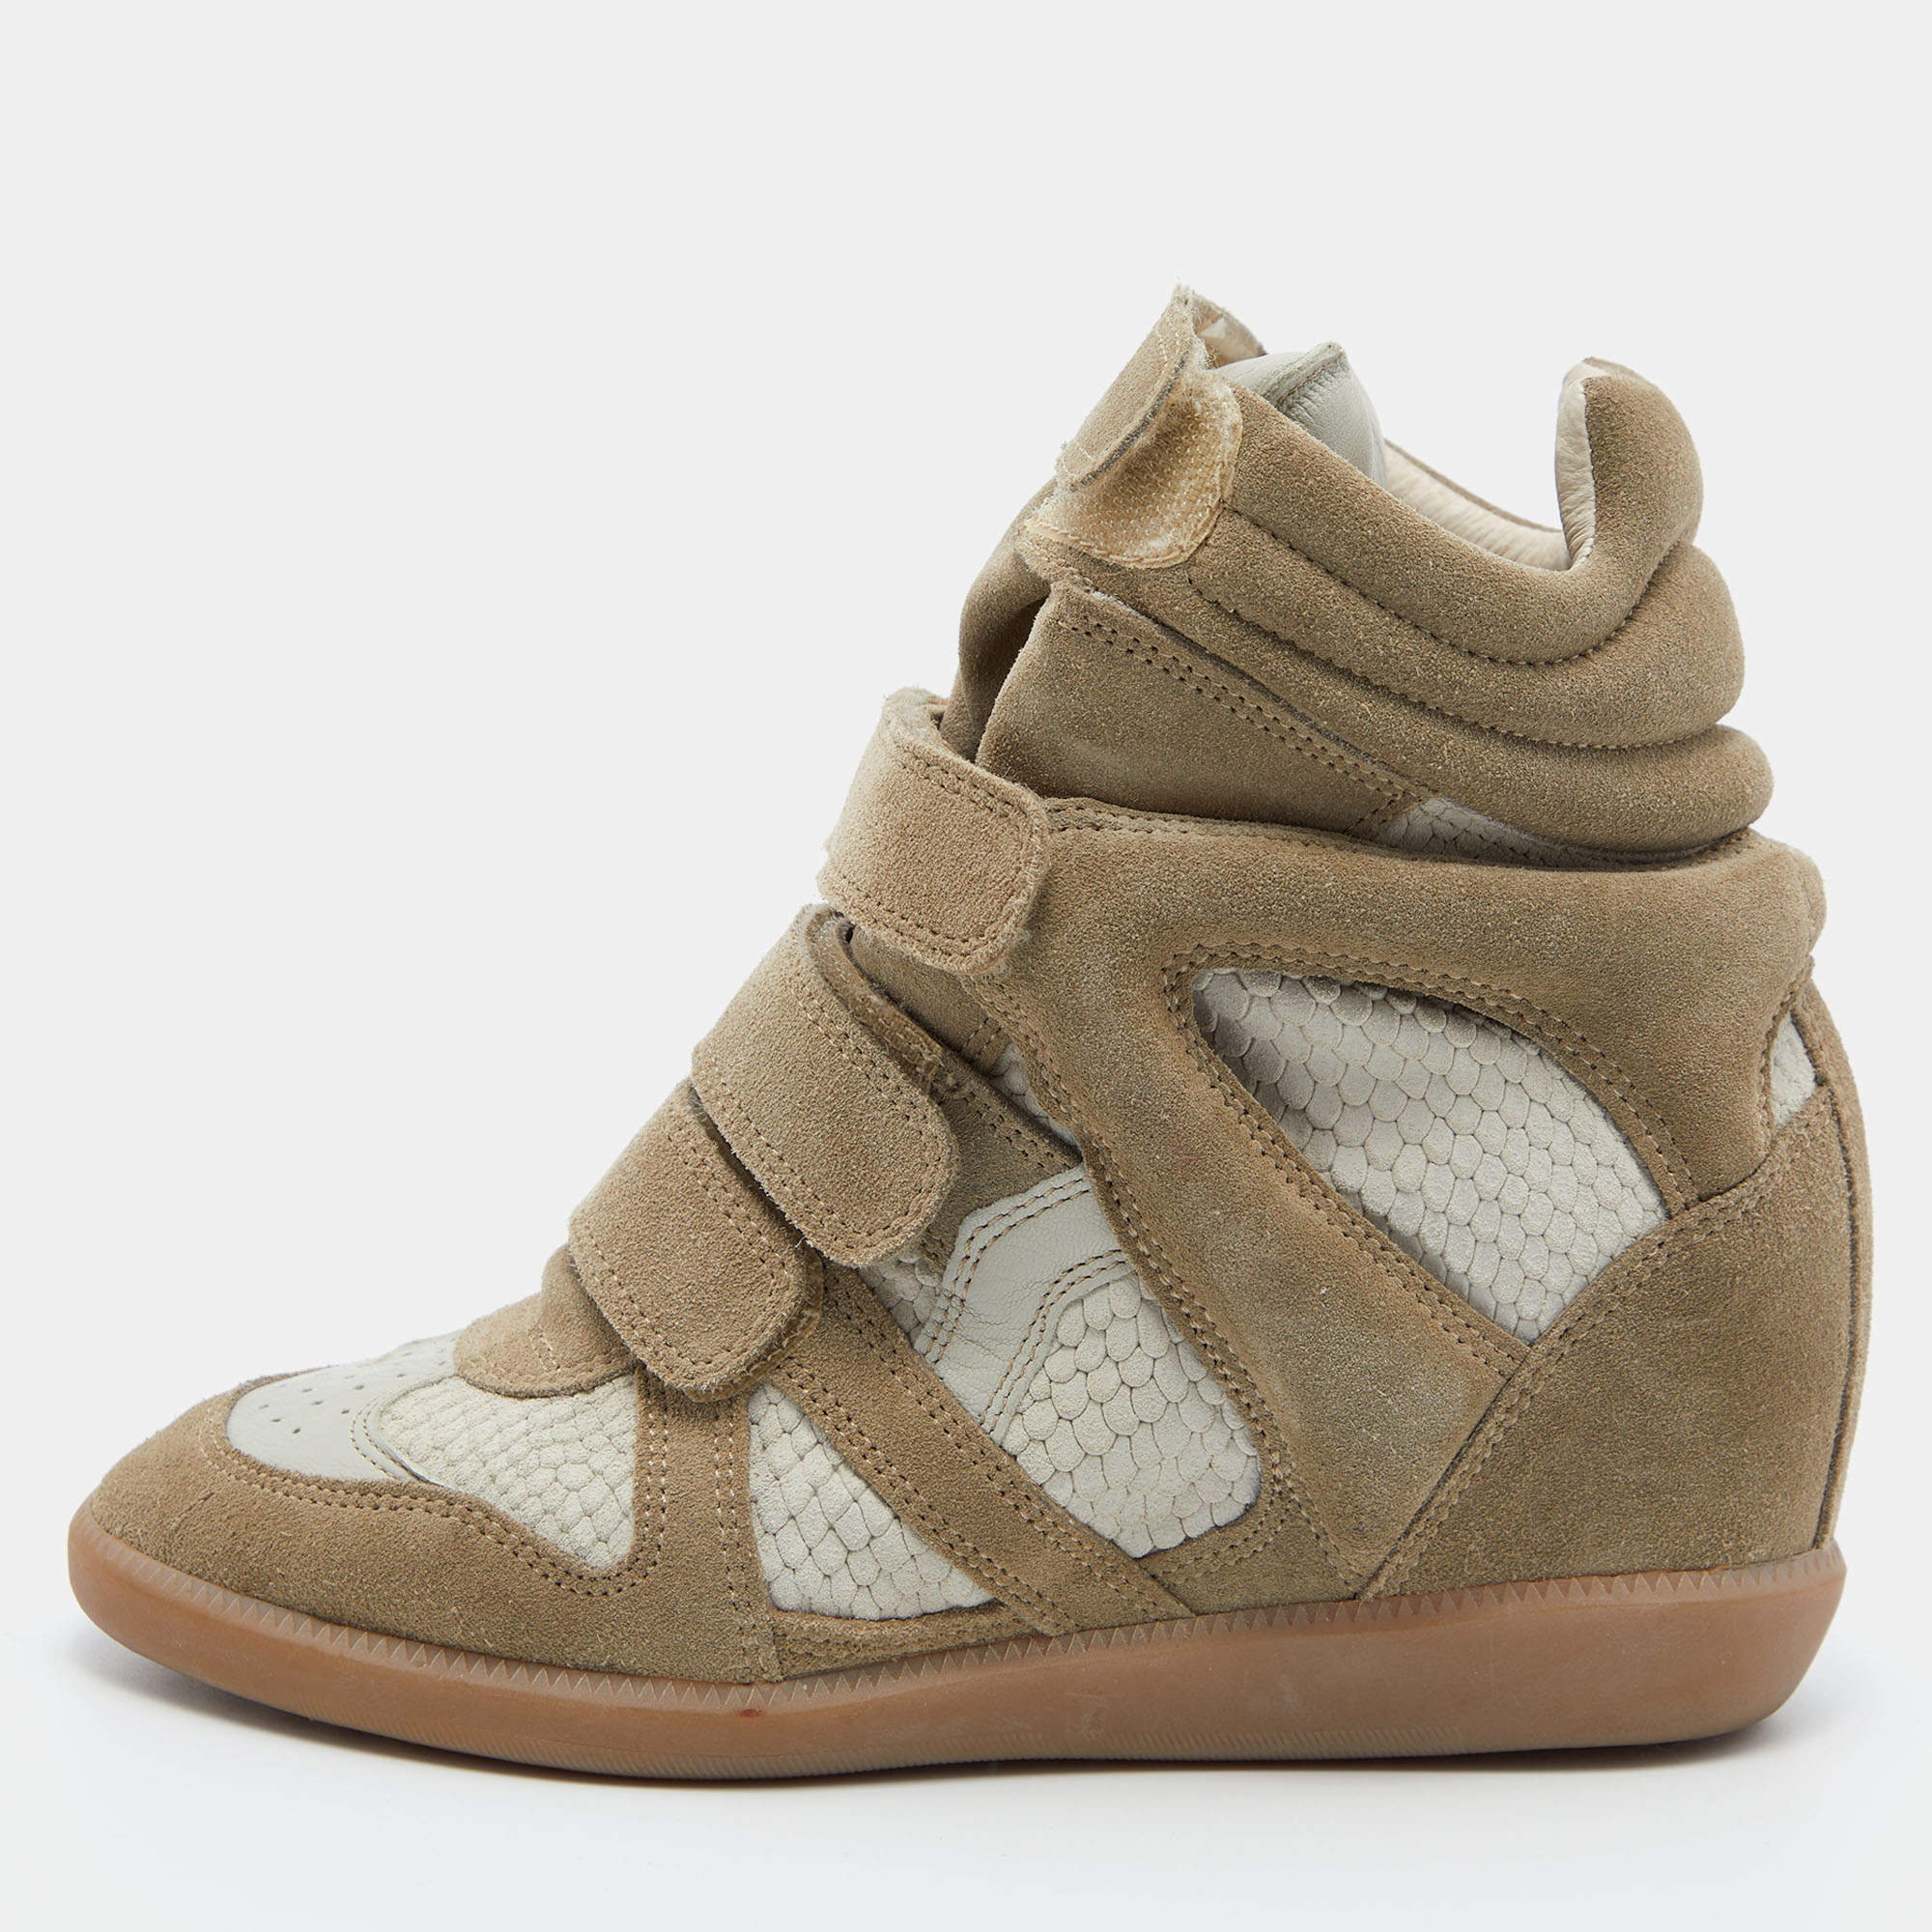 desillusion Dental Moderat Isabel Marant Beige Leather and Suede Bekett Wedge Sneakers Size 37 Isabel  Marant | TLC